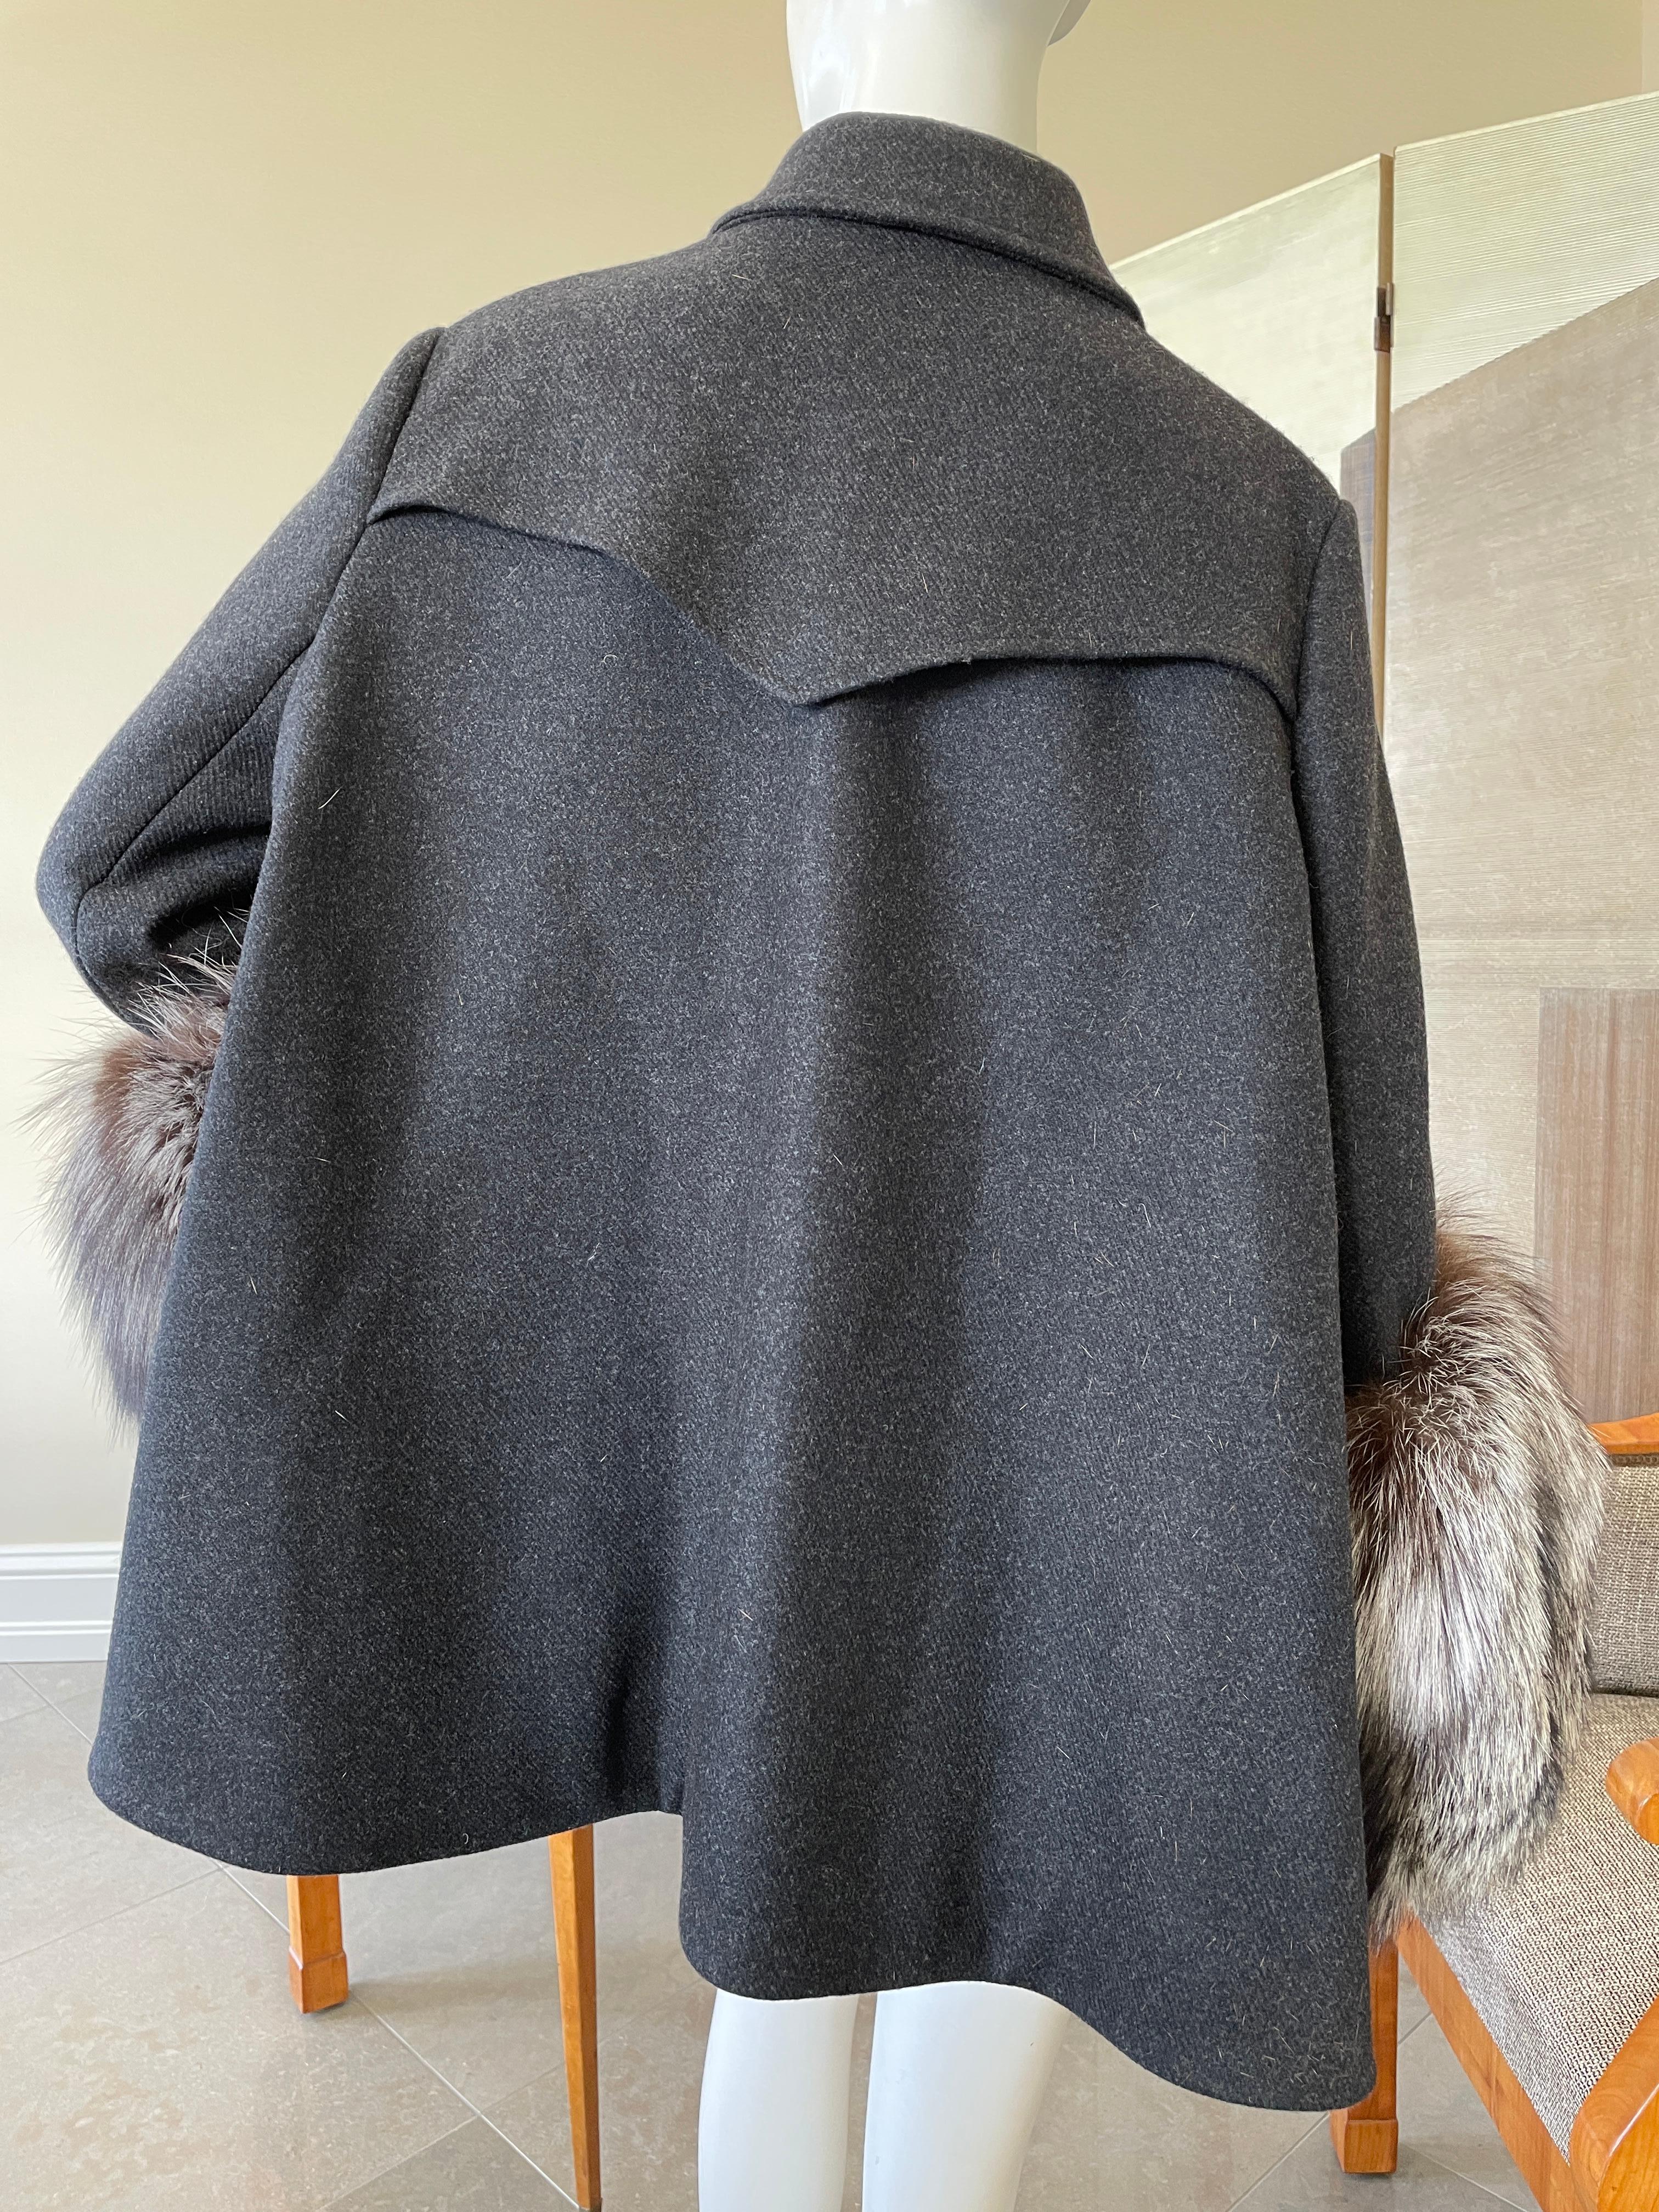 Christian Dior by Gianfranco Ferre Gray Peacoat with Fox Fur Cuffs For Sale 1